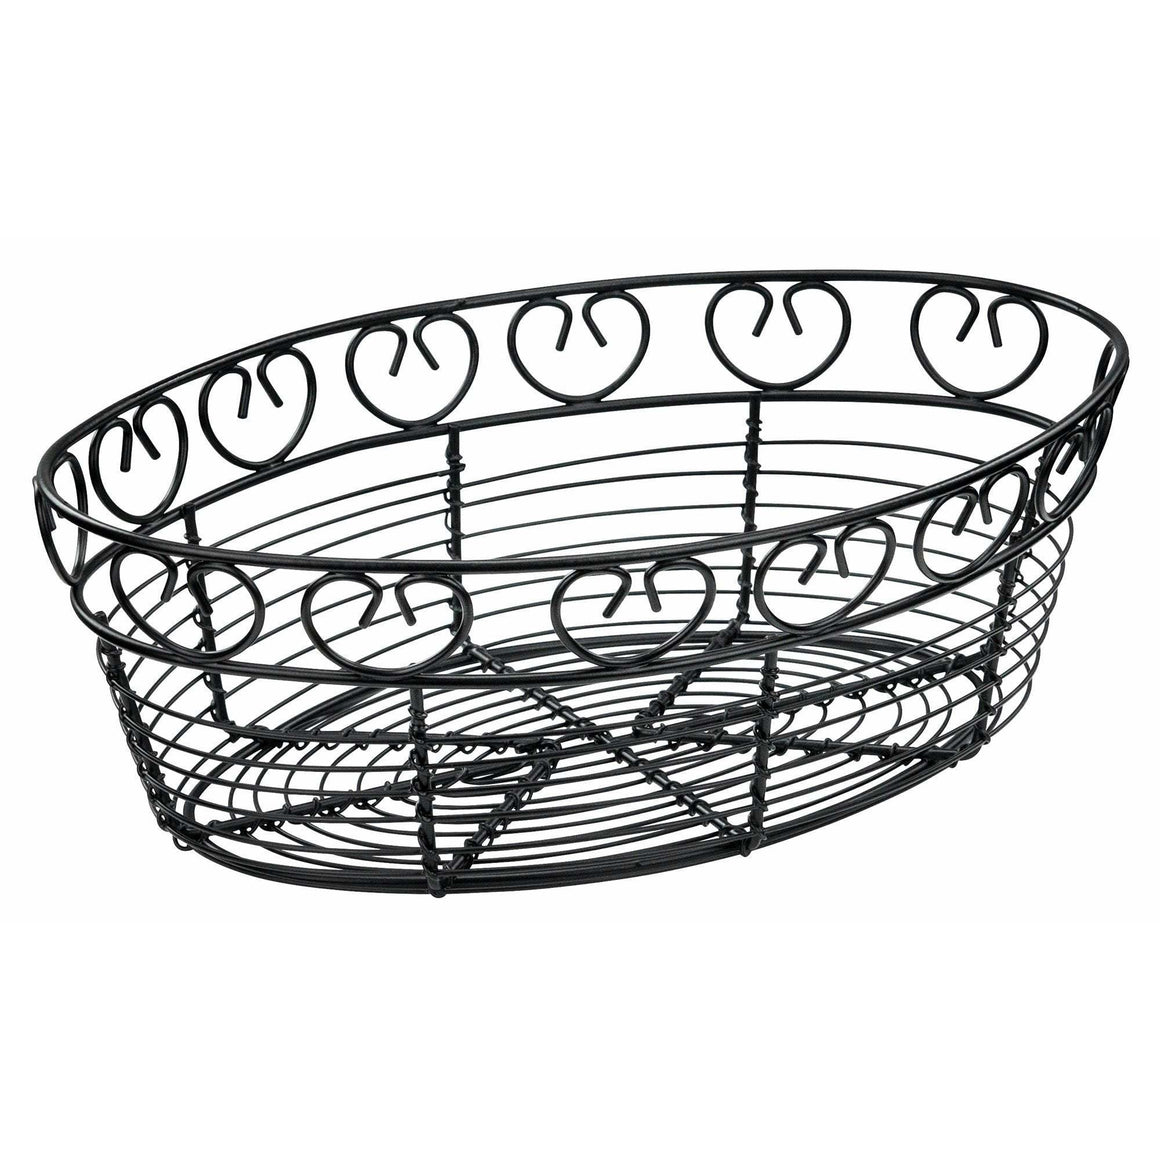 Winco - WBKG-10O - Bread/Fruit Basket, Black Wire, Oval, 10" x 6-1/2" x 3" - Tabletop - Maltese & Co New and Used  restaurant Equipment 